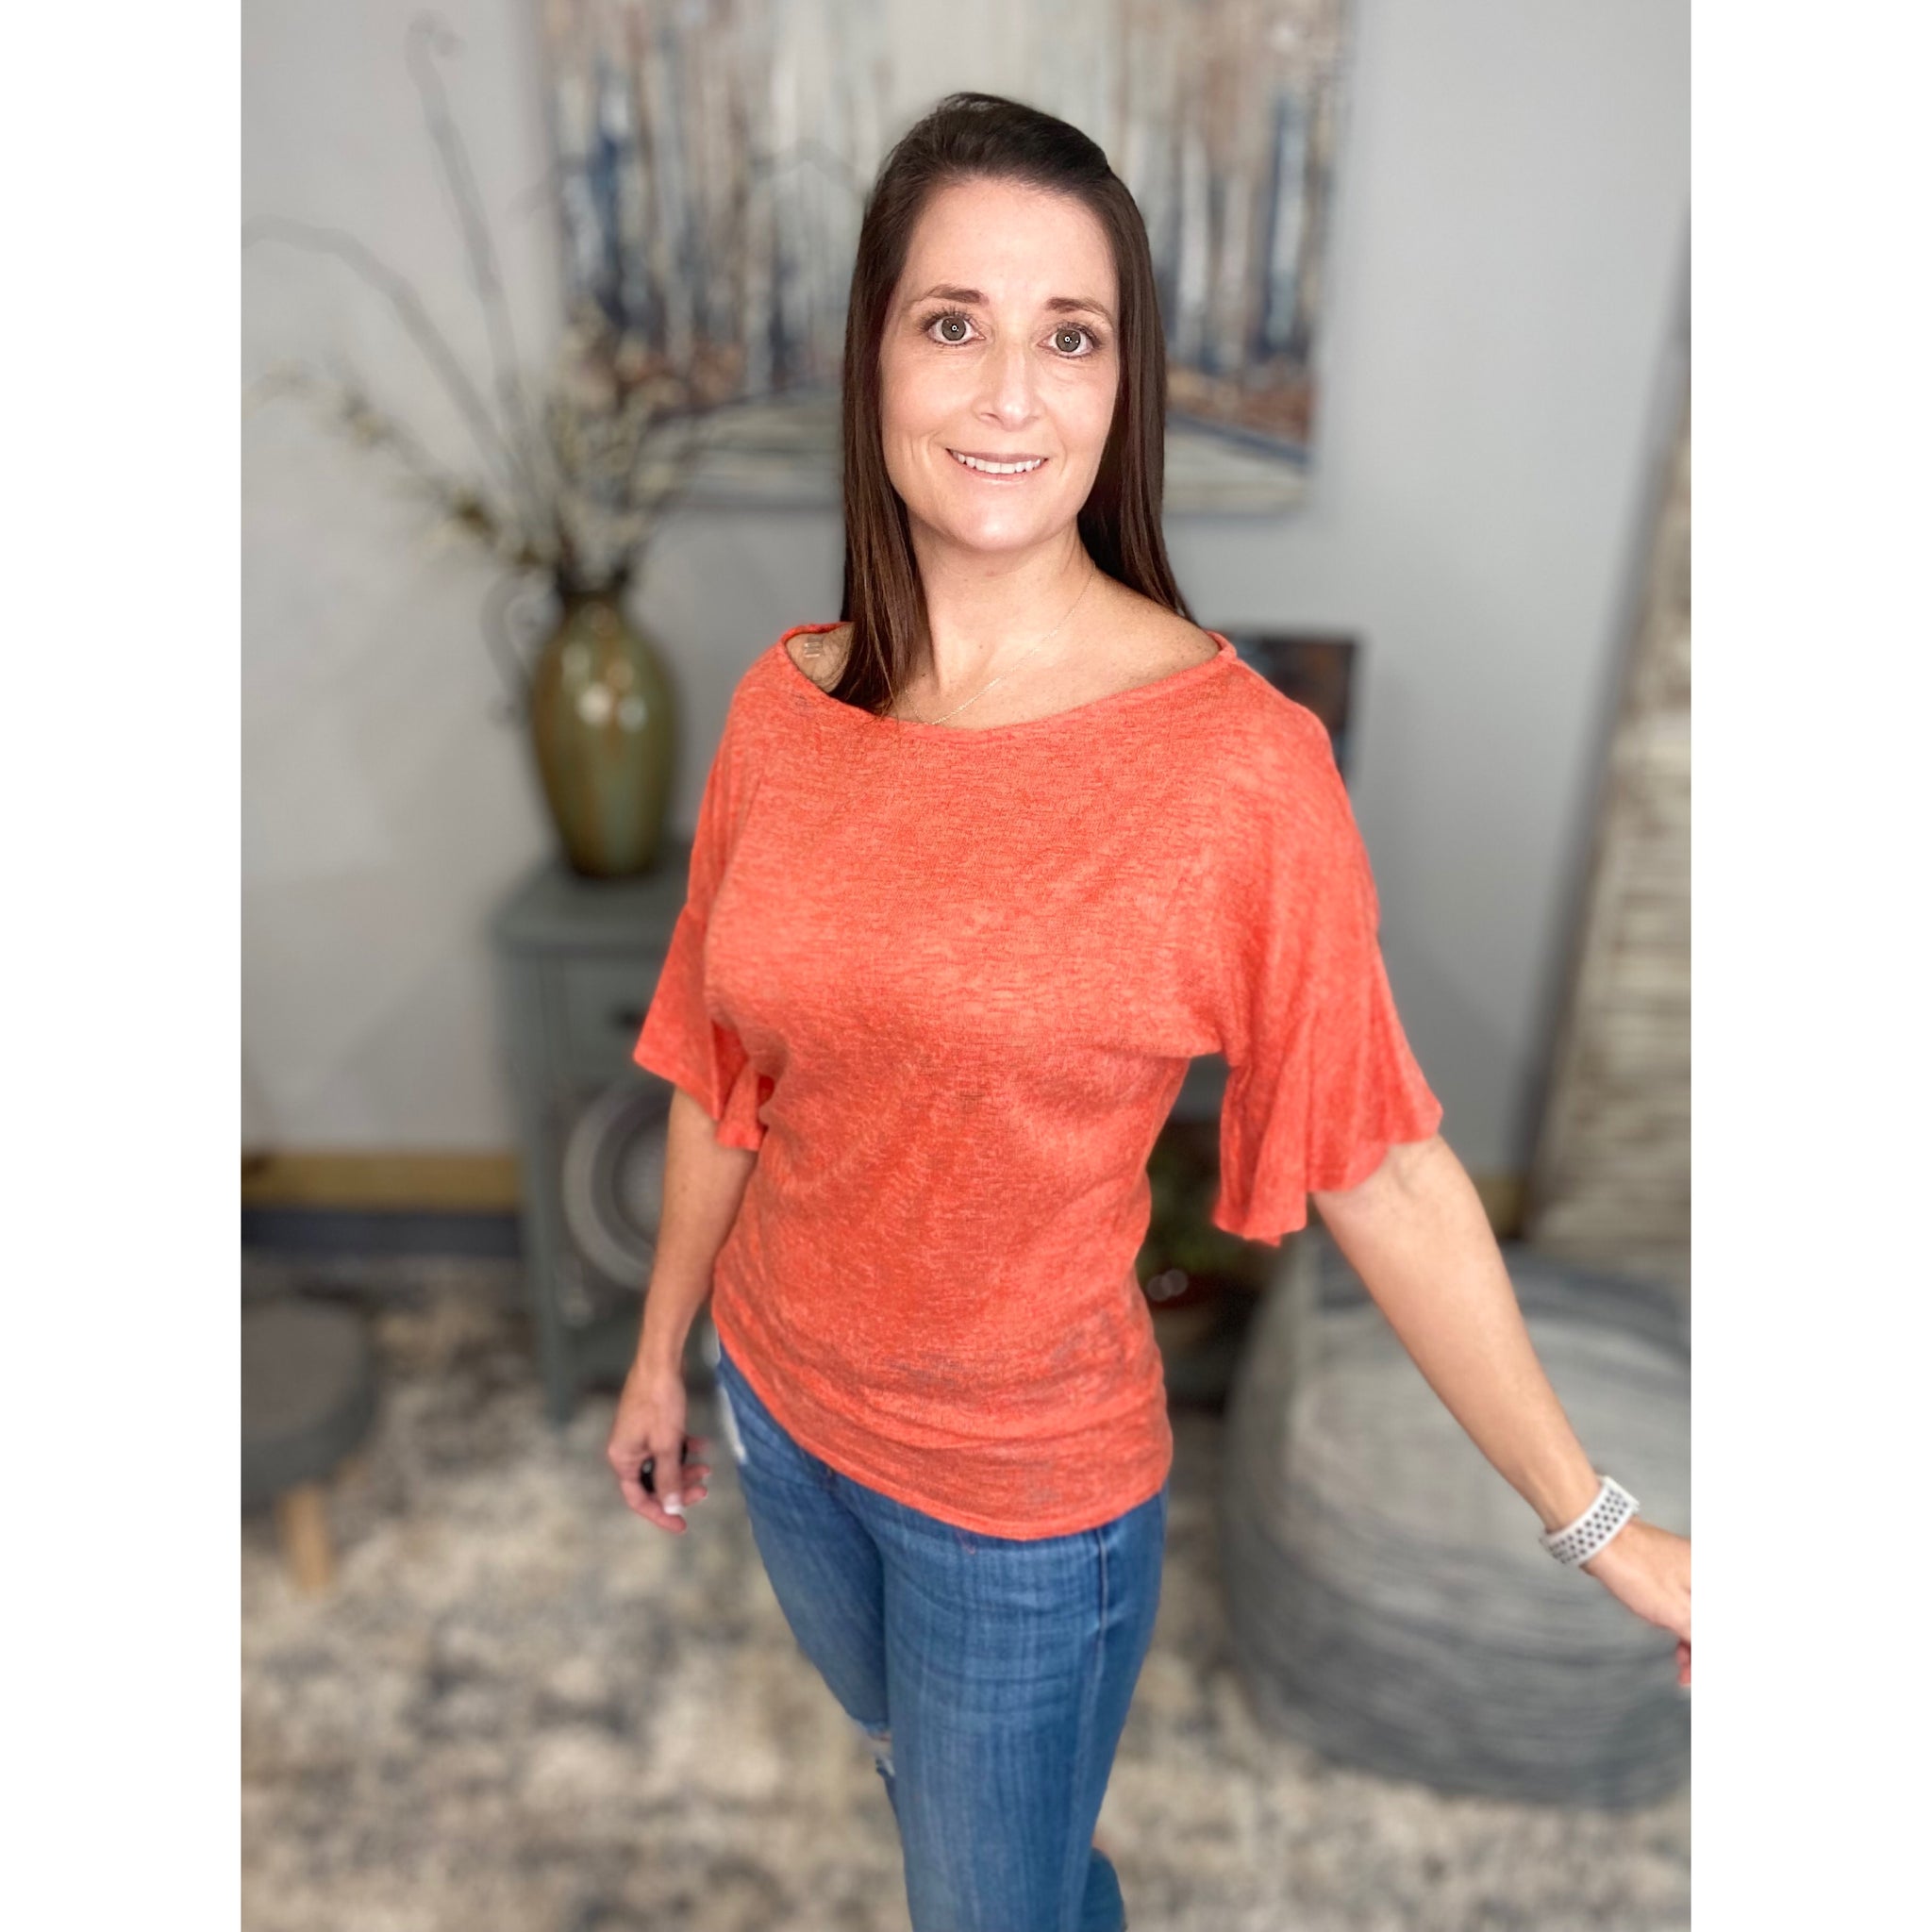 "Charmed Life" Boat Neck Short Ruffle Bell Dolman Flutter Sleeve Top Coral S/M/L